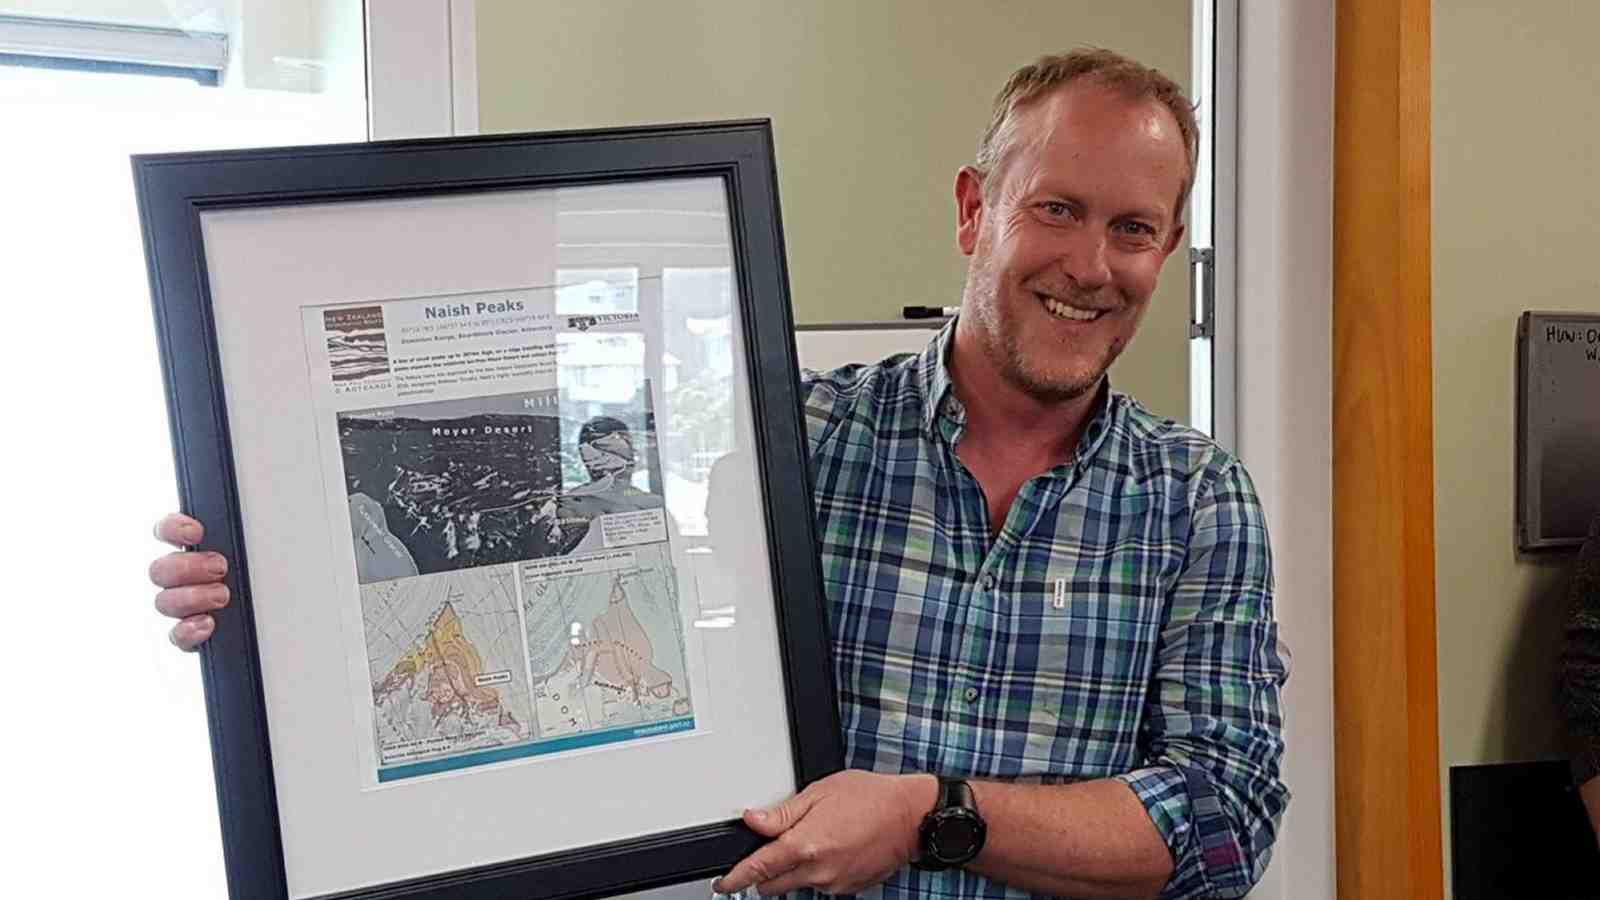 Tim Naish presented with a plaque for Naish Peaks.